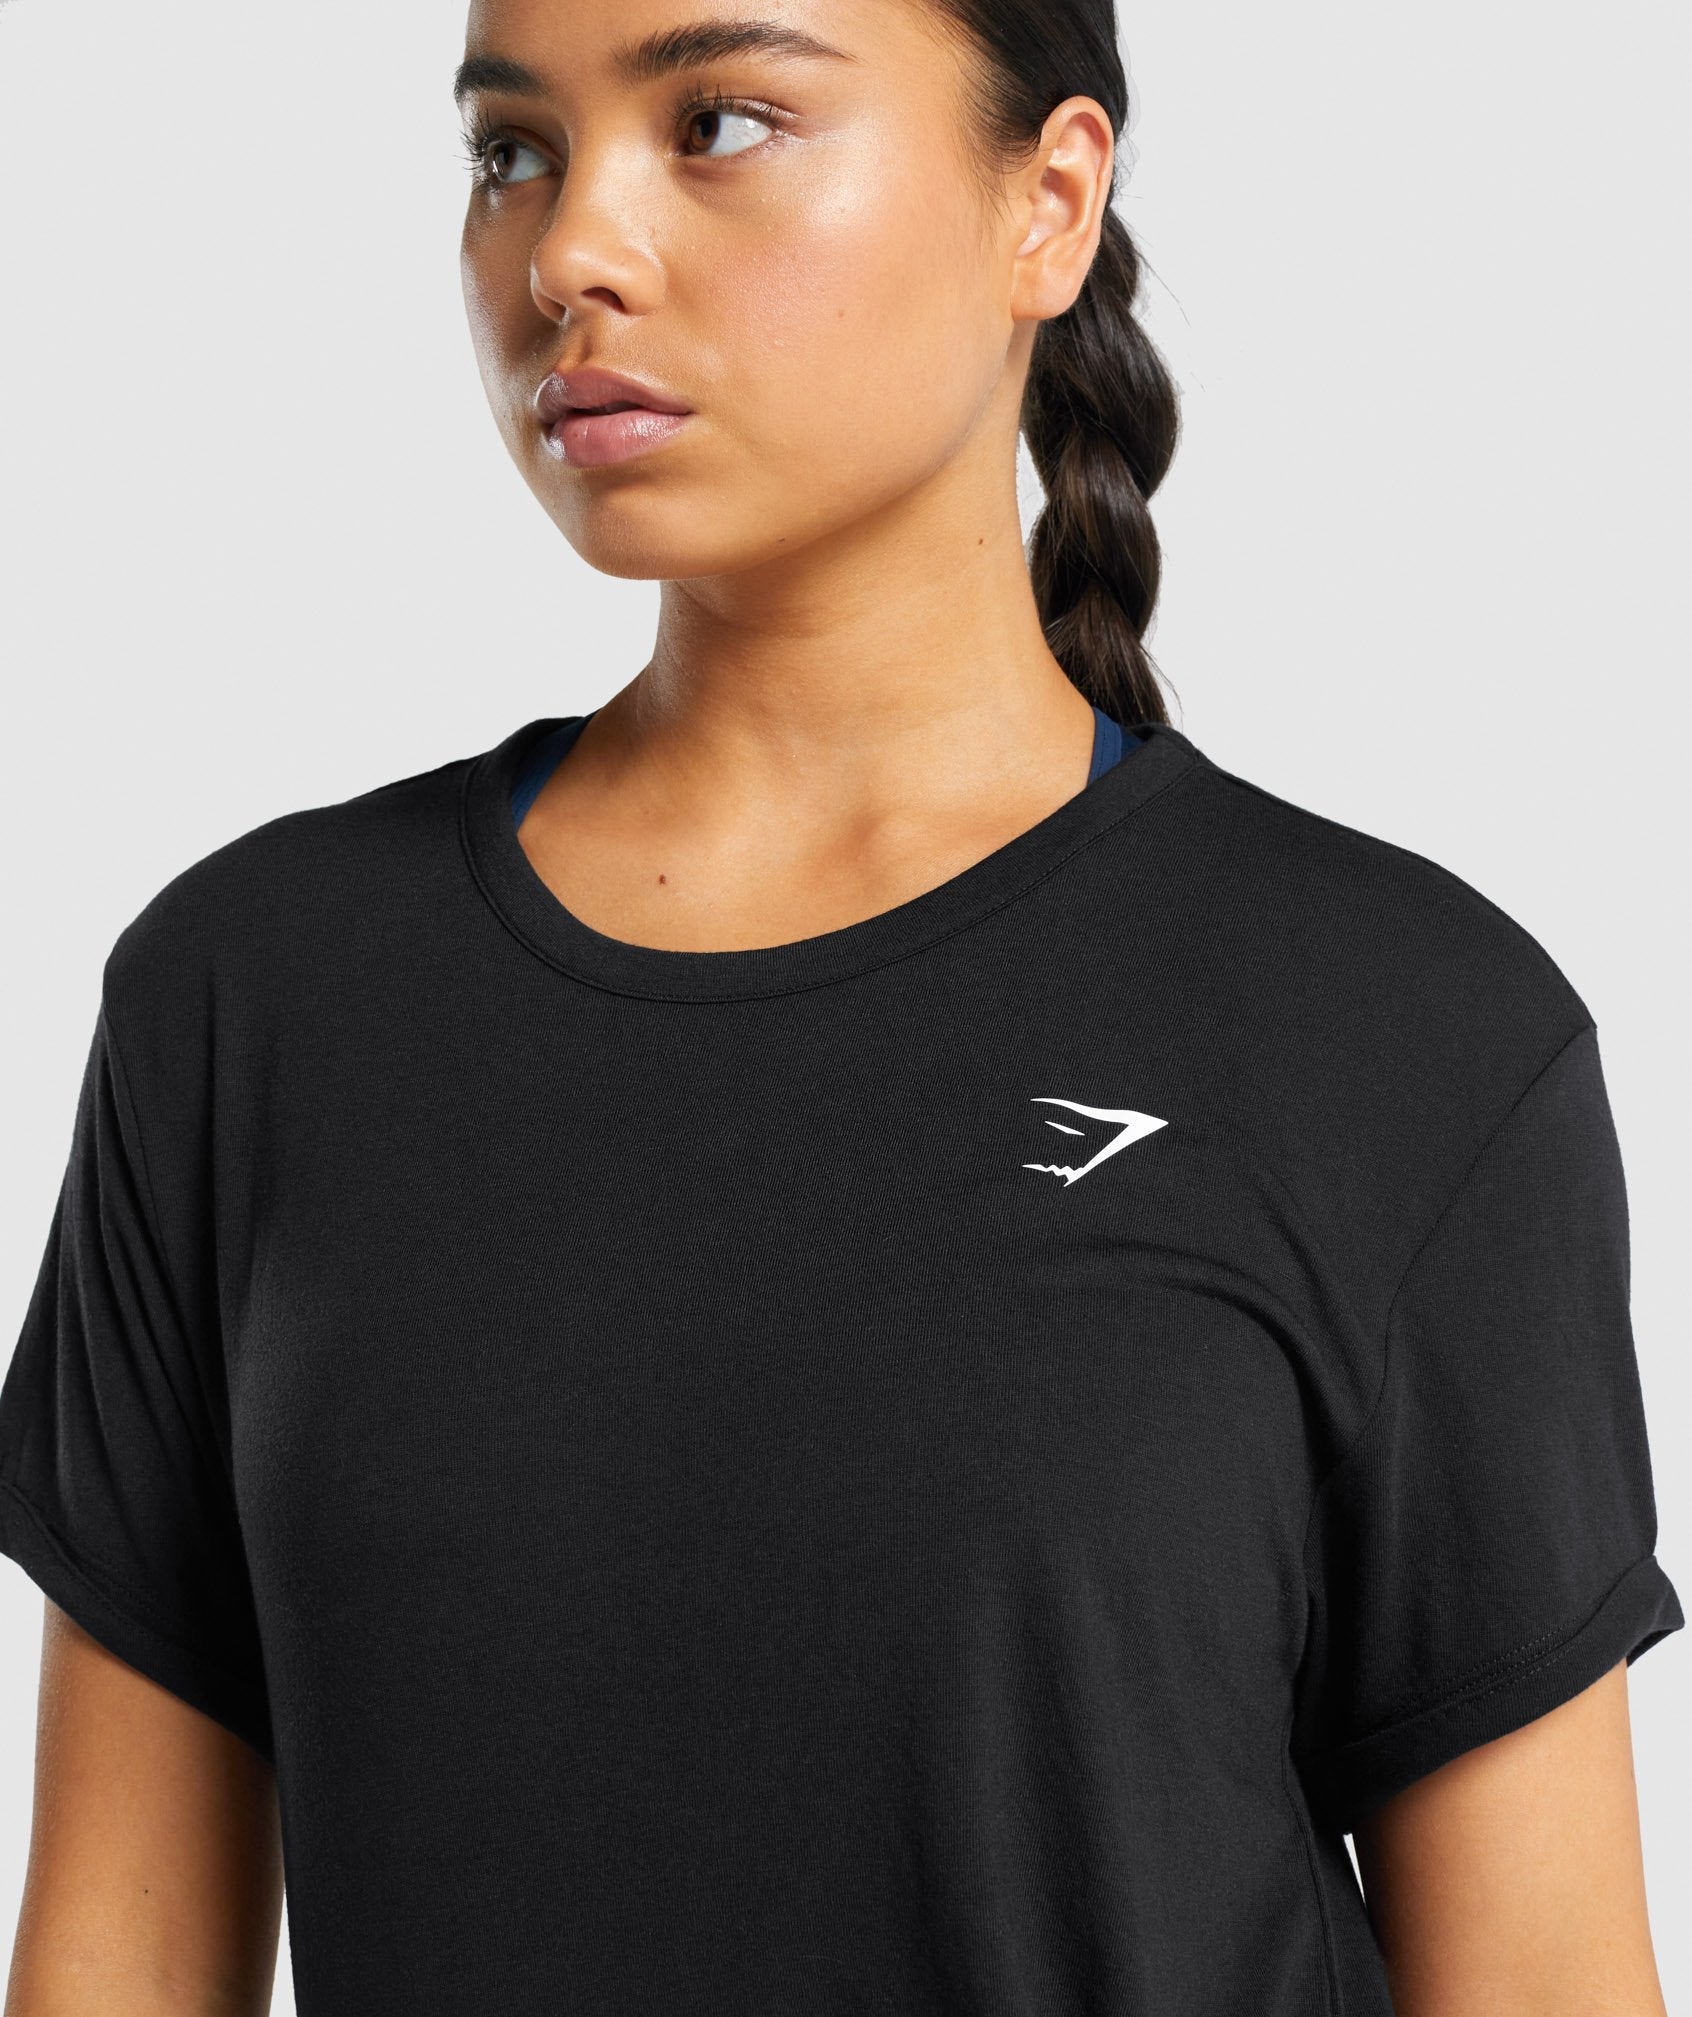 Essential T-Shirt in Black - view 5